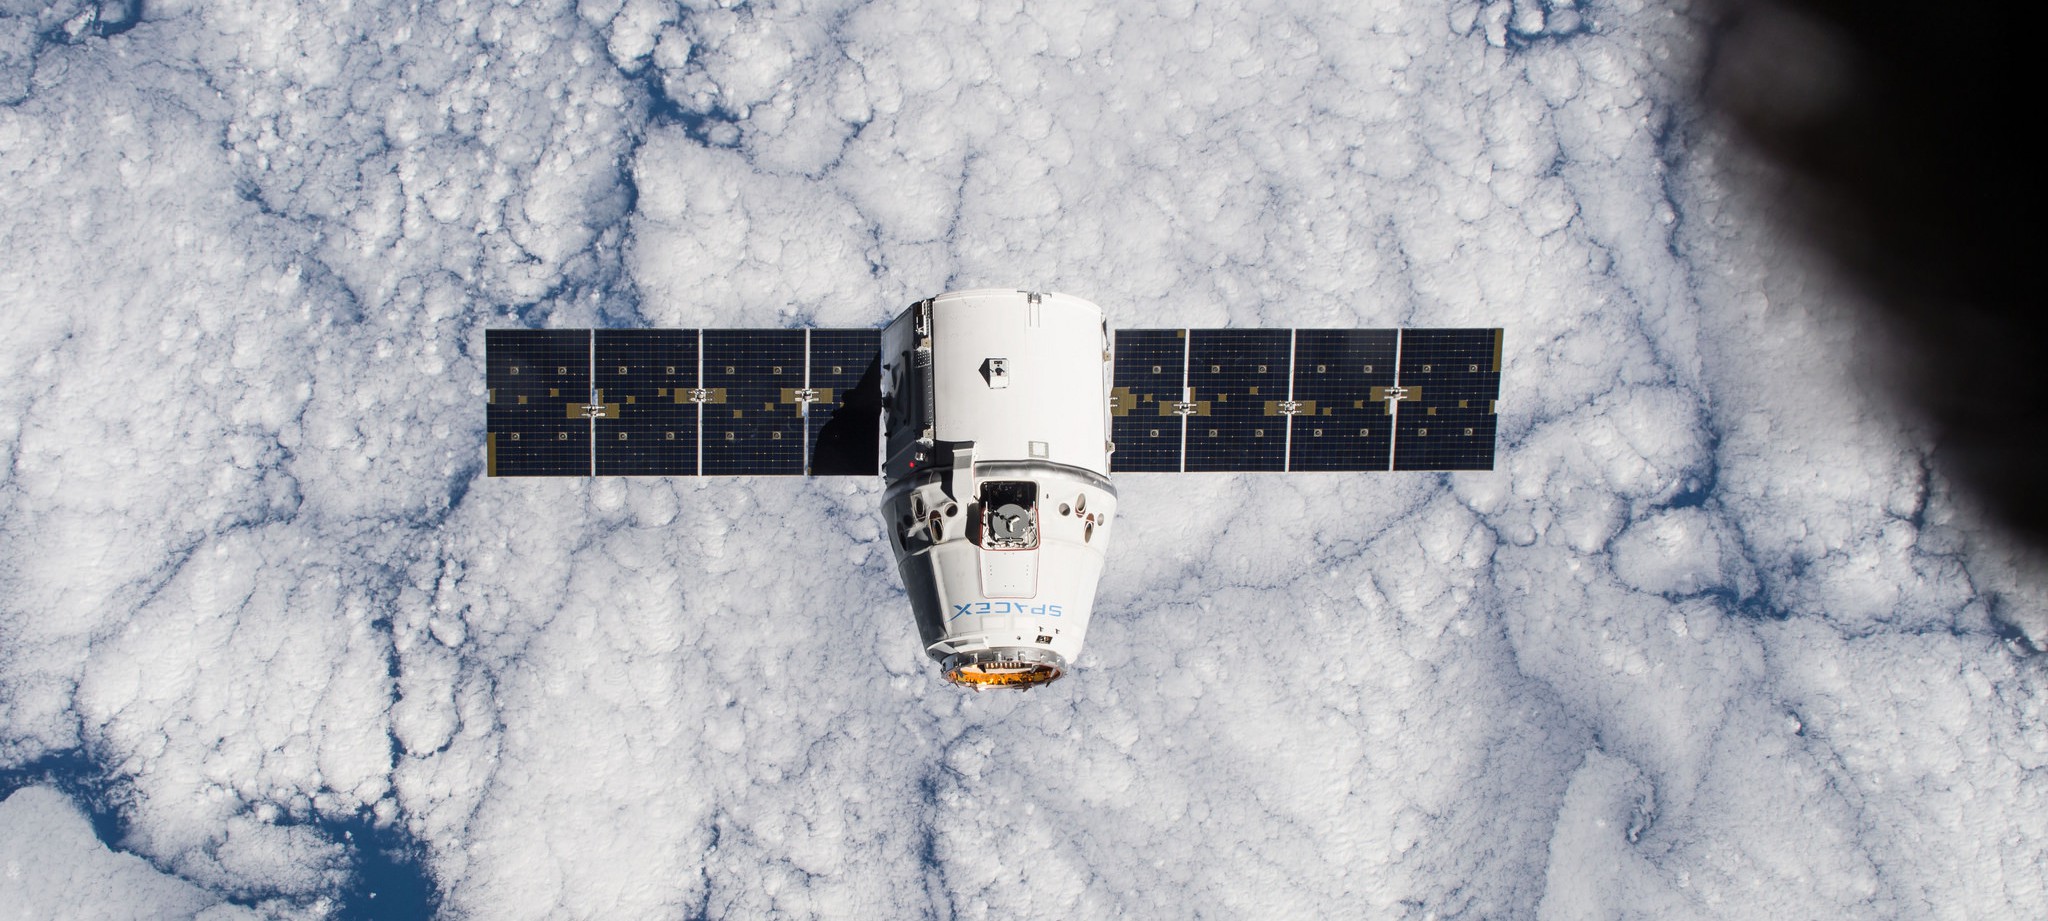 by one of the Expedition 42 crew members aboard the International Space Station, shows the SpaceX Dragon cargo craft approaching on Jan. 12 2015 - NASA Johnson